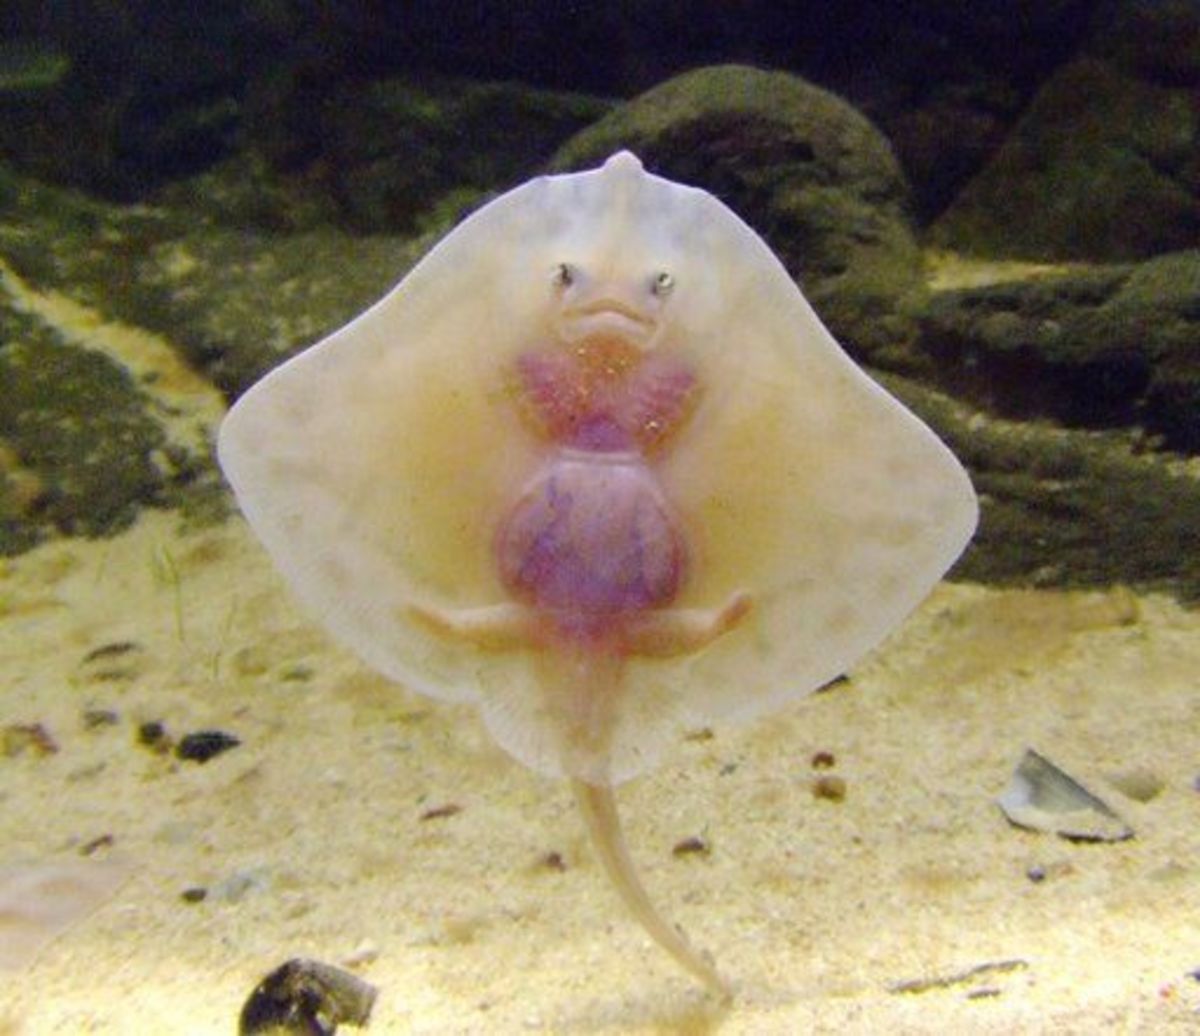 This article will provide information on various fascinating rays of the ocean, such as the cute baby stingray shown here.